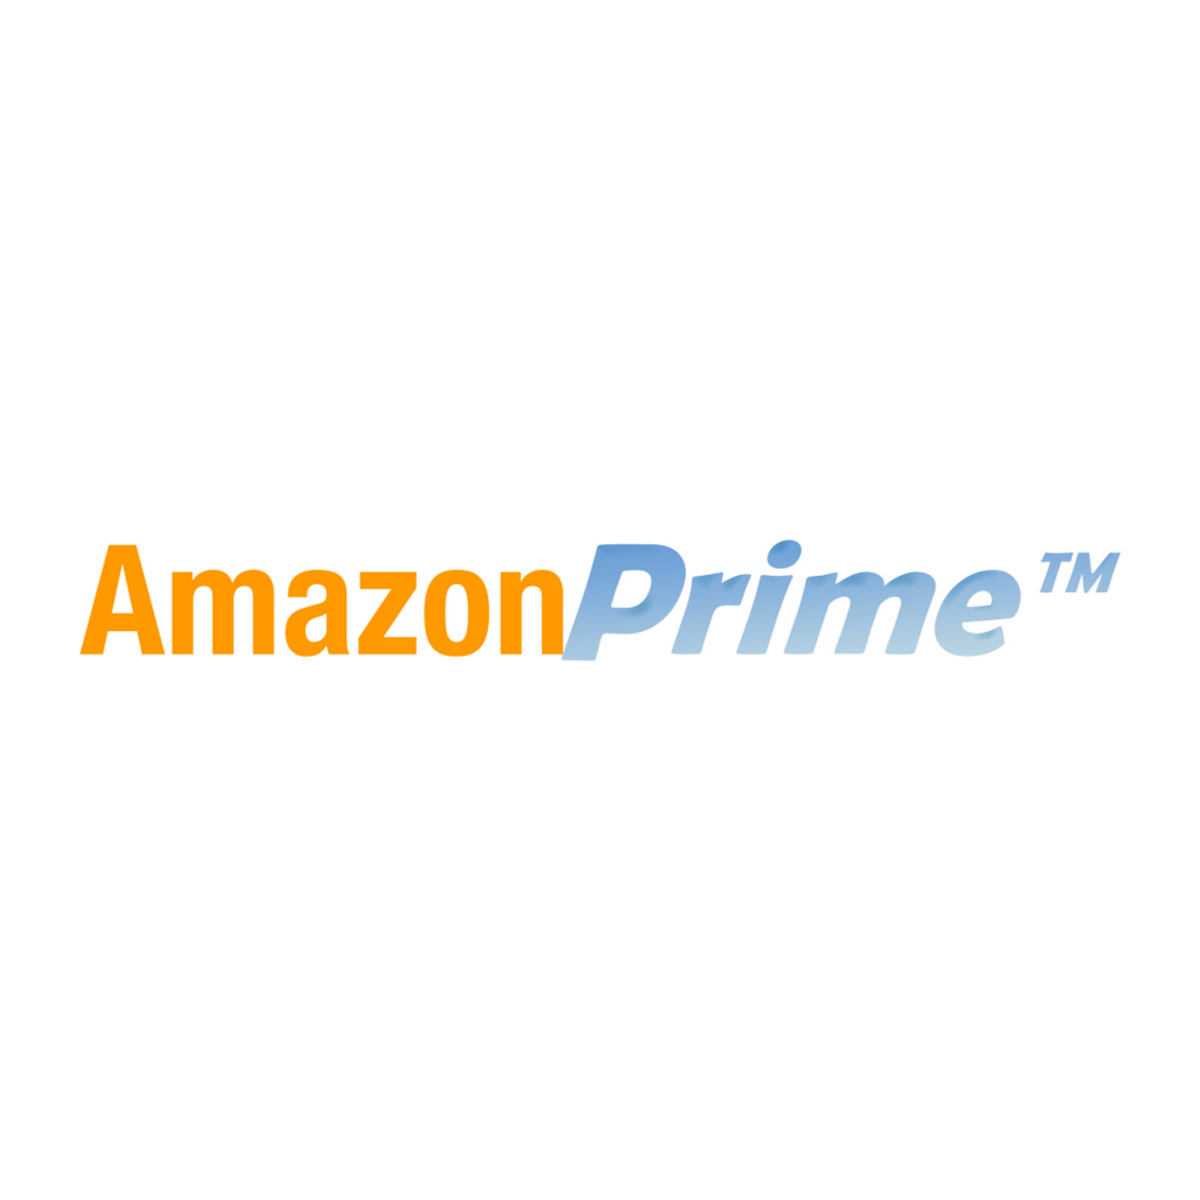 Why Amazon Gives Students Have Free Amazon Prime